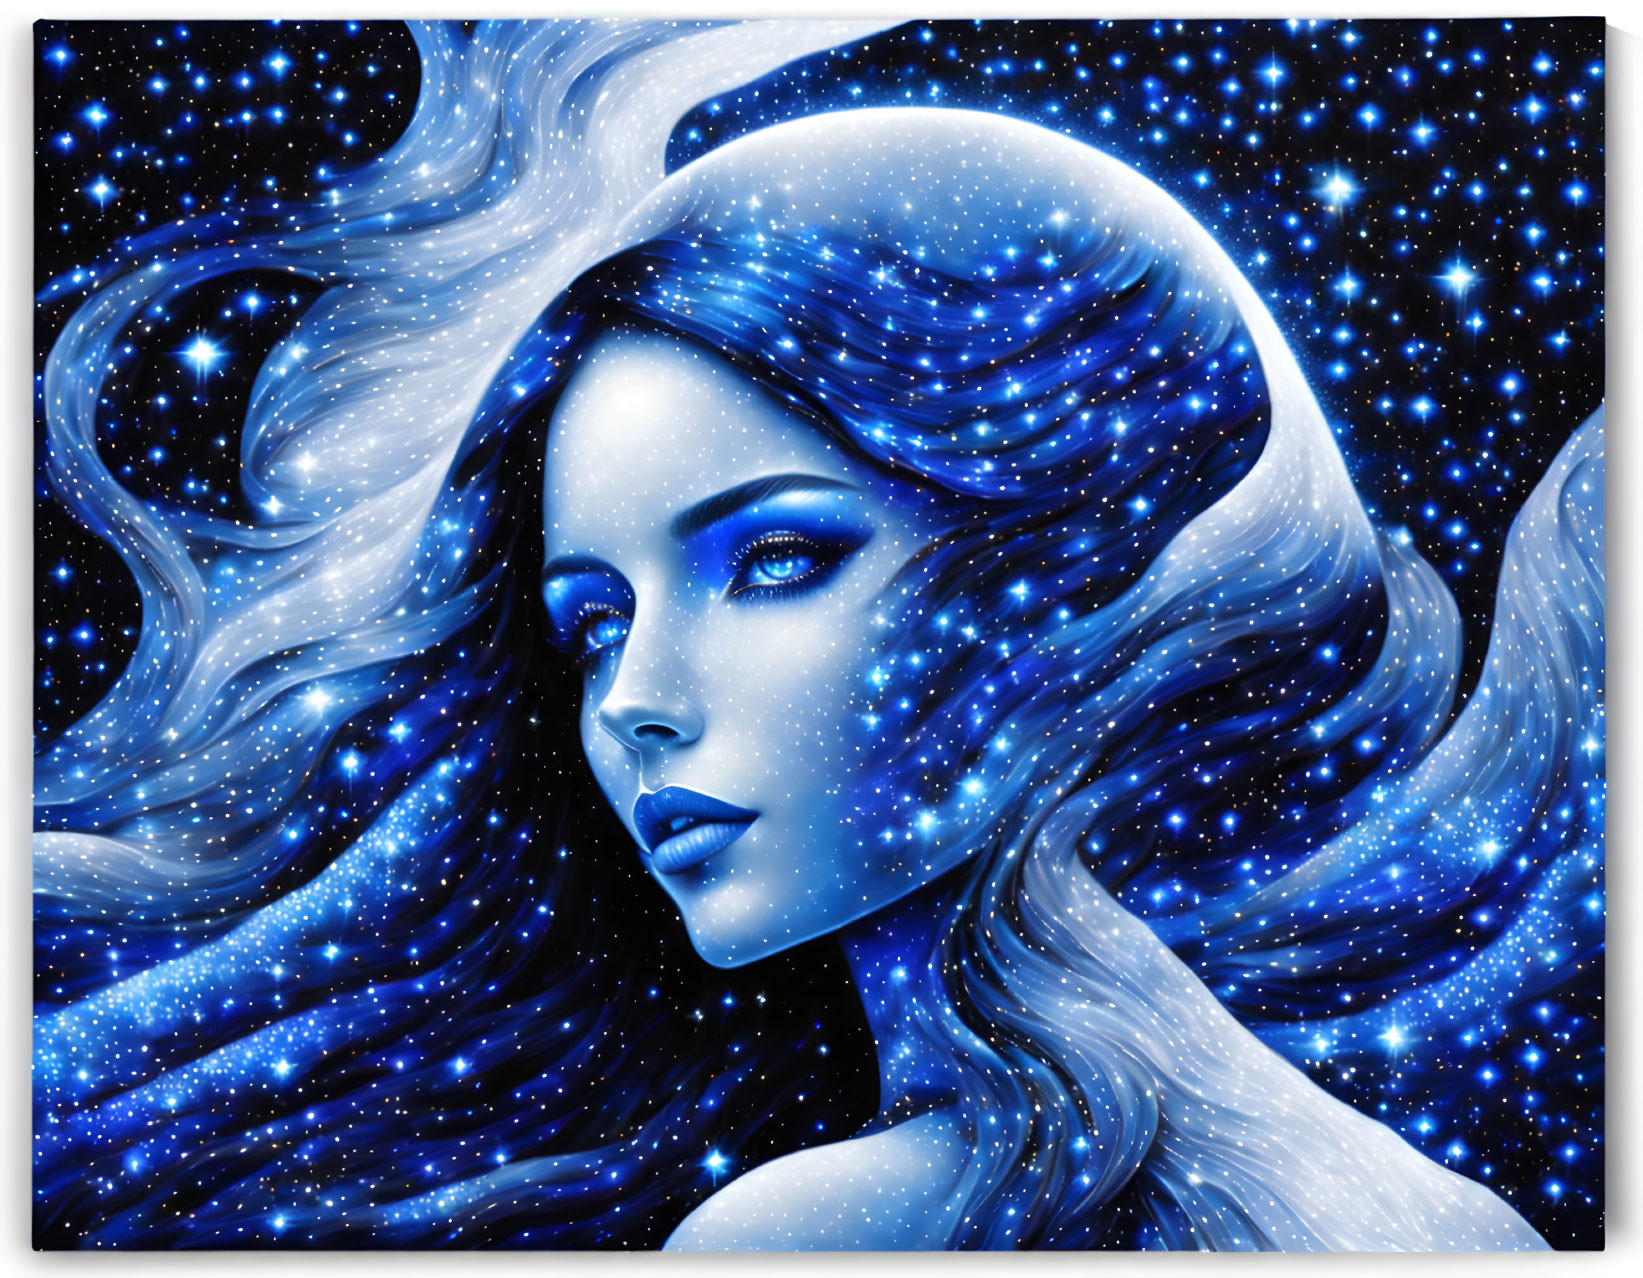 Surreal illustration of woman with blue skin and hair blending into starry night sky